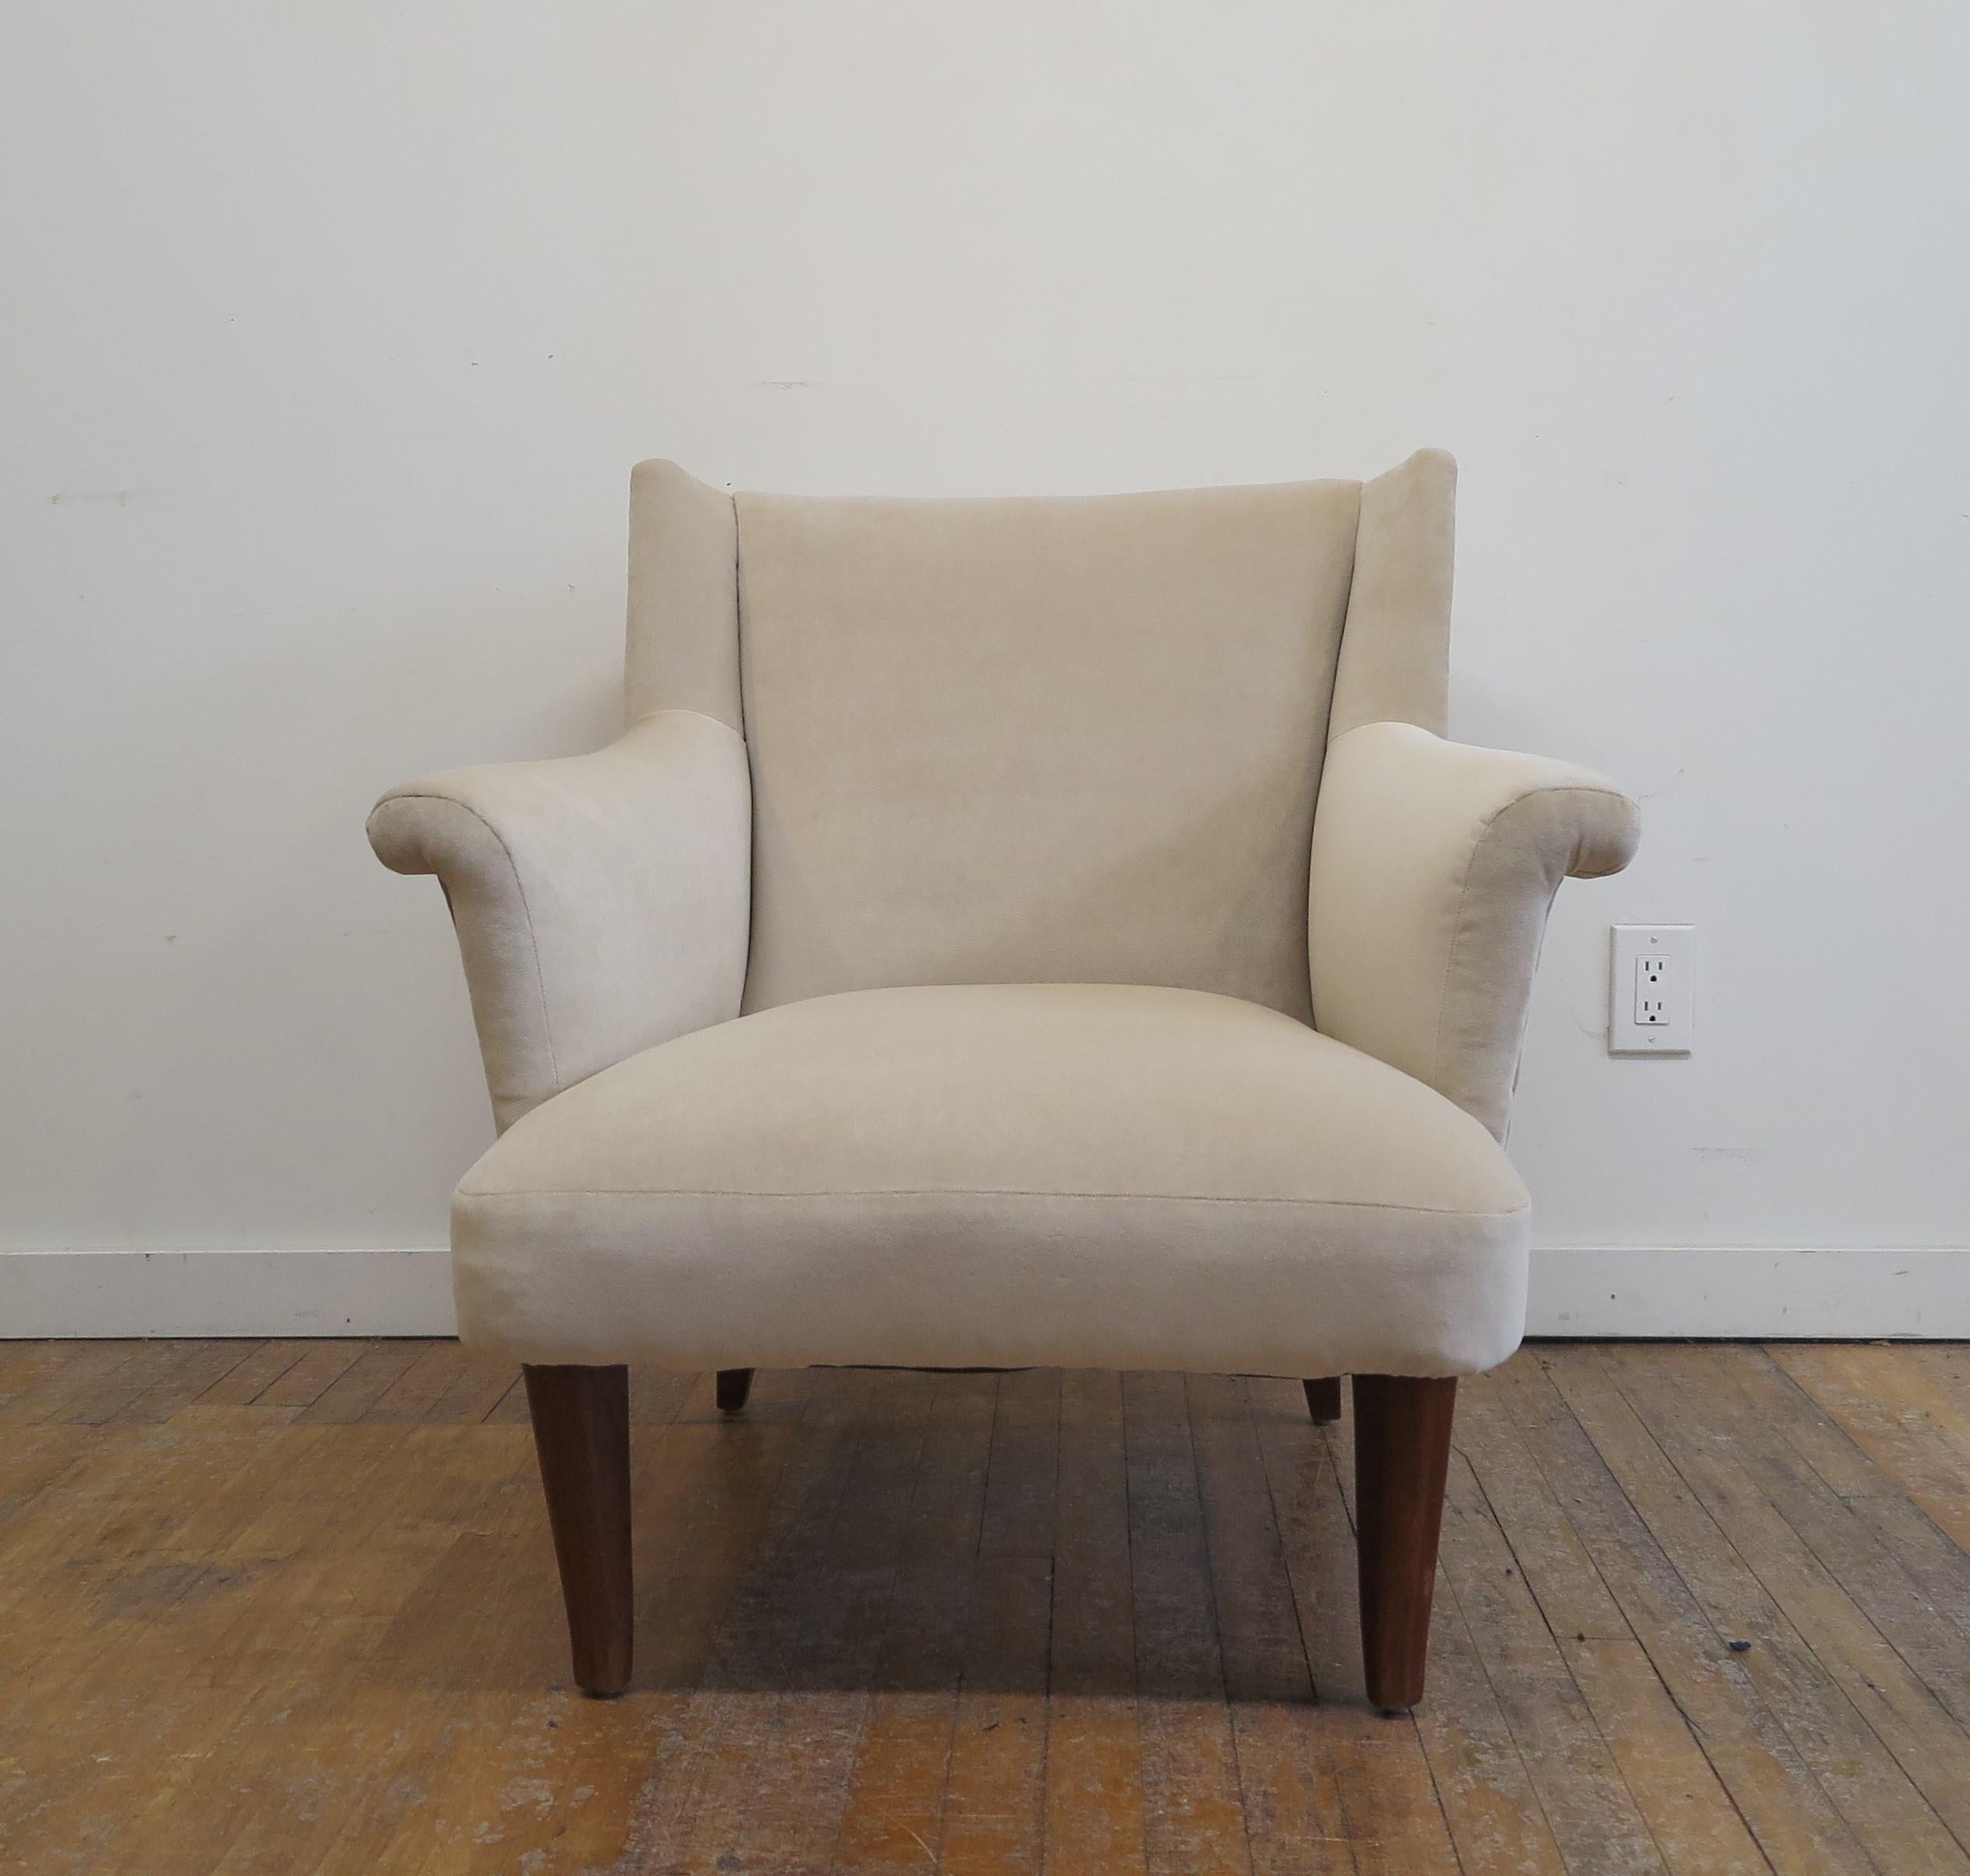 American Edward Wormley Lounge Chair #4796 for Dunbar For Sale